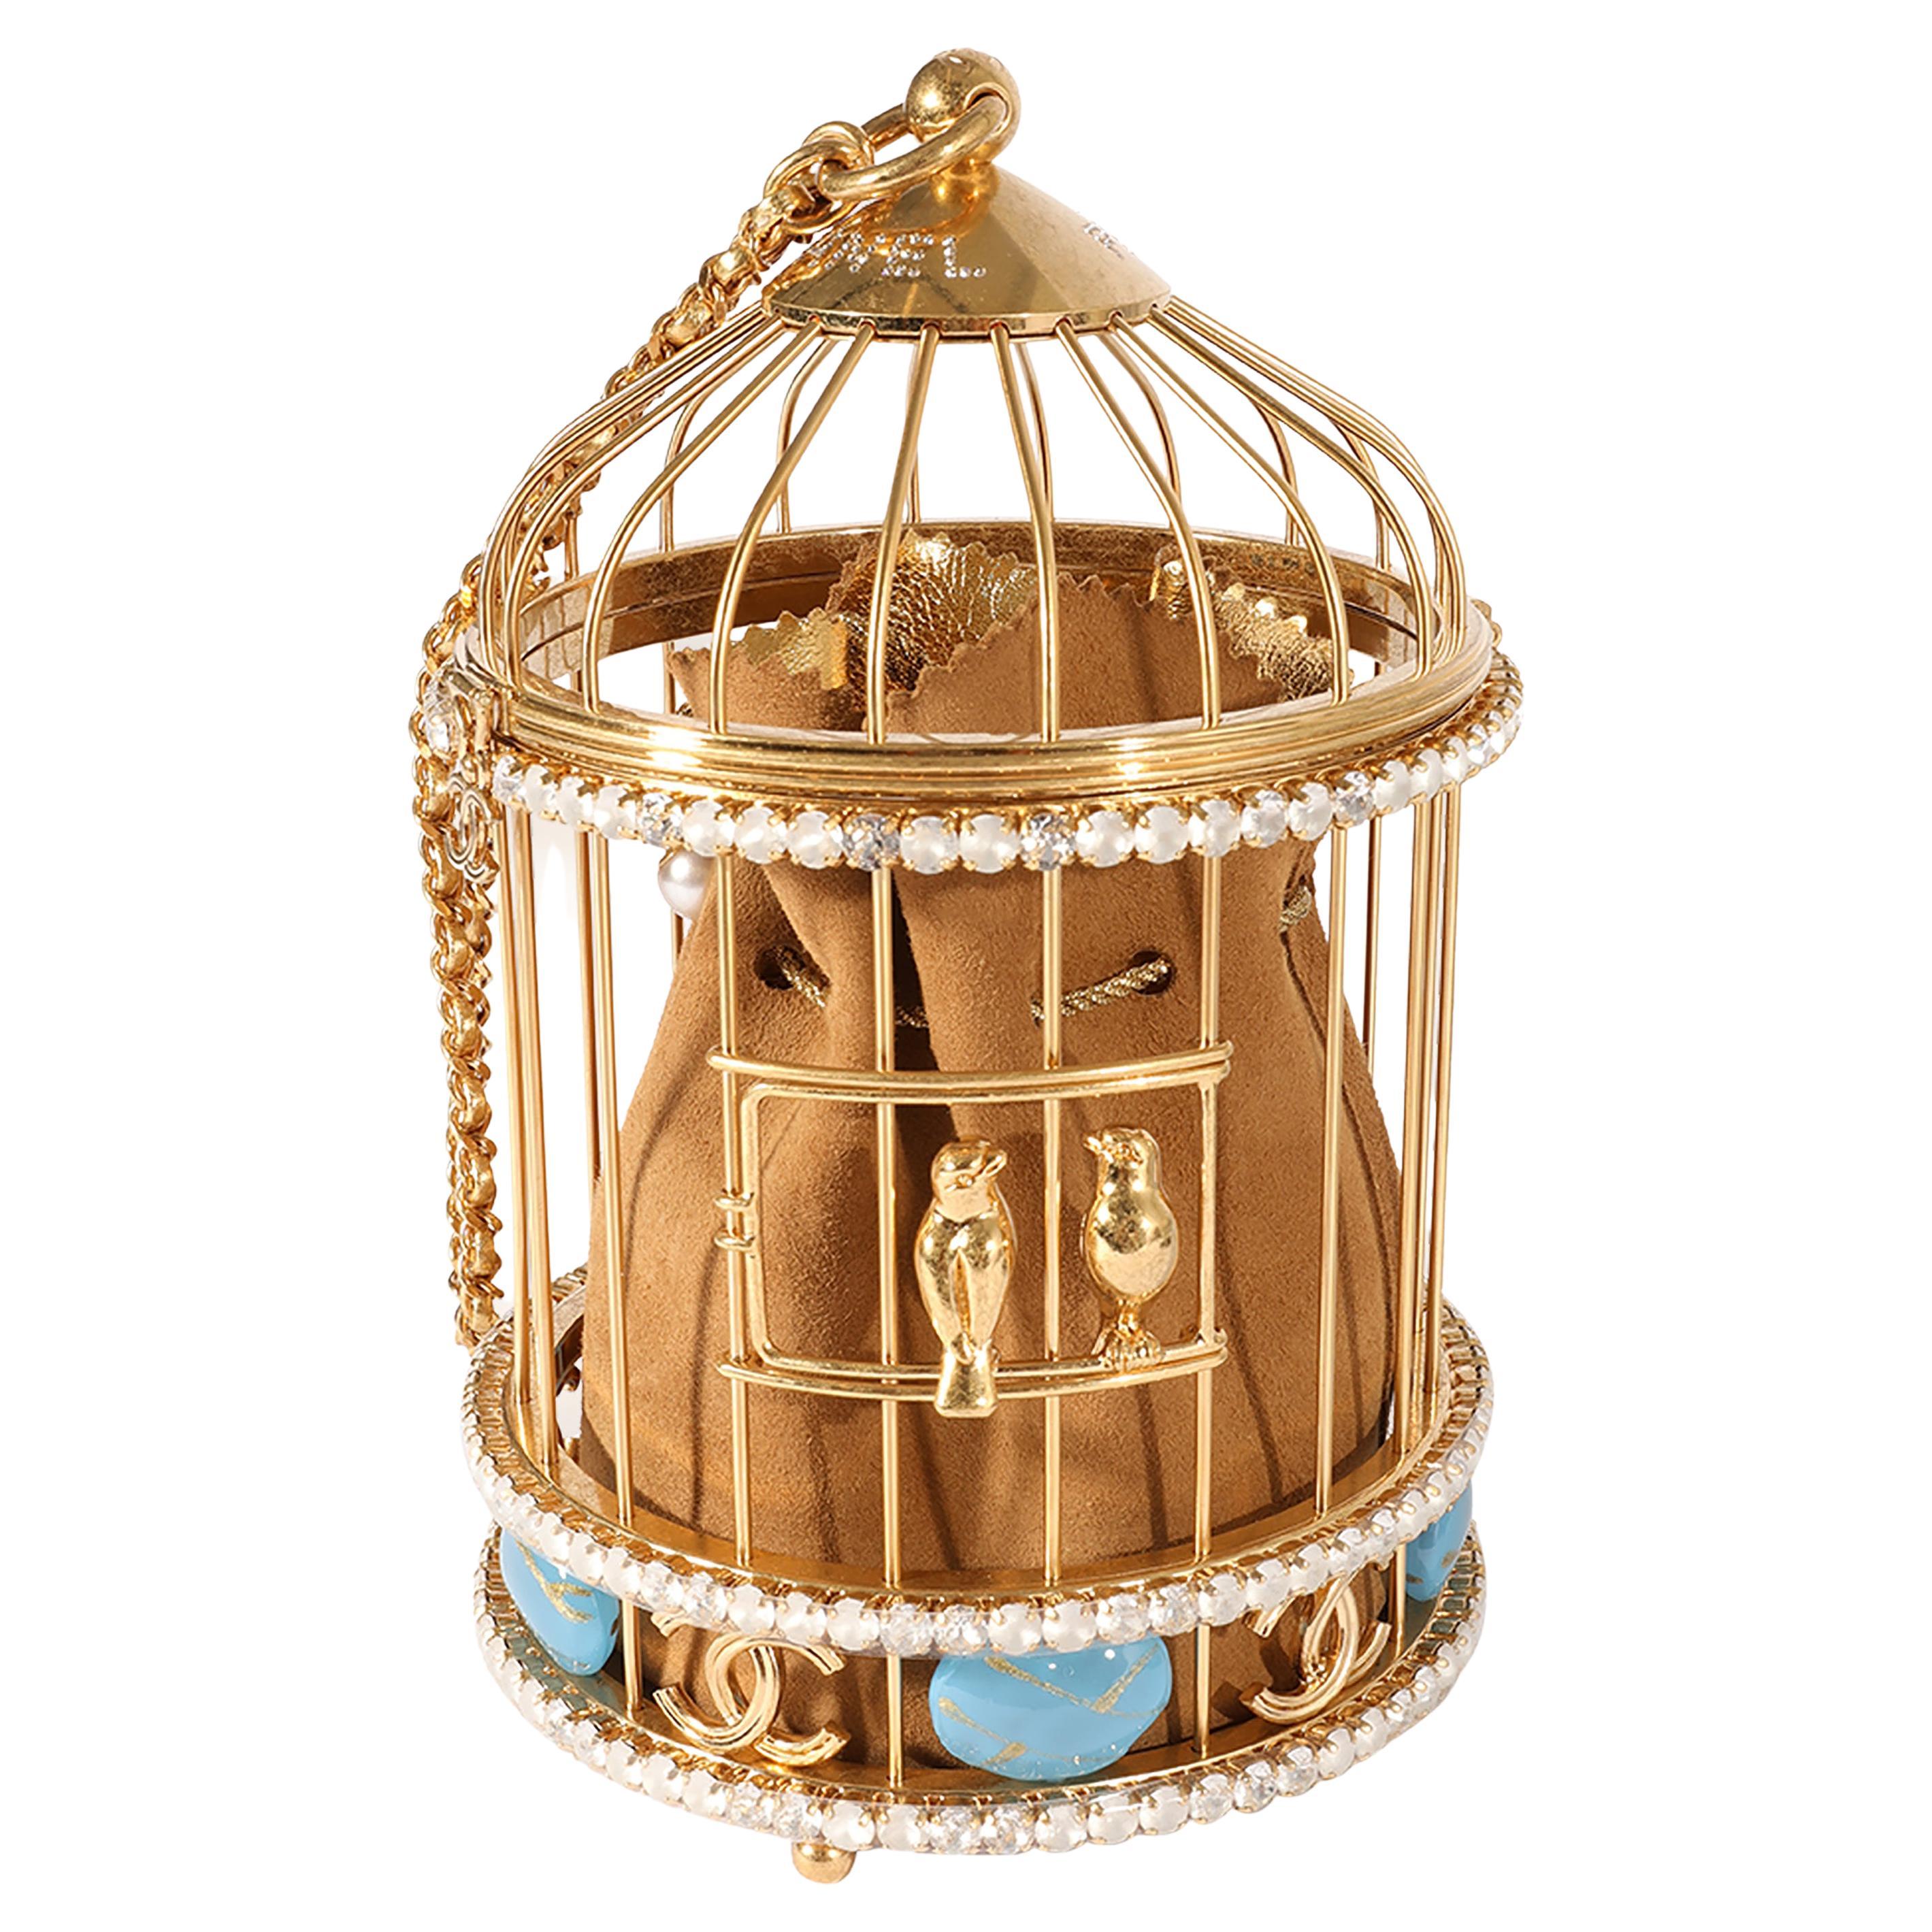 Chanel Gold Cage - 11 For Sale on 1stDibs